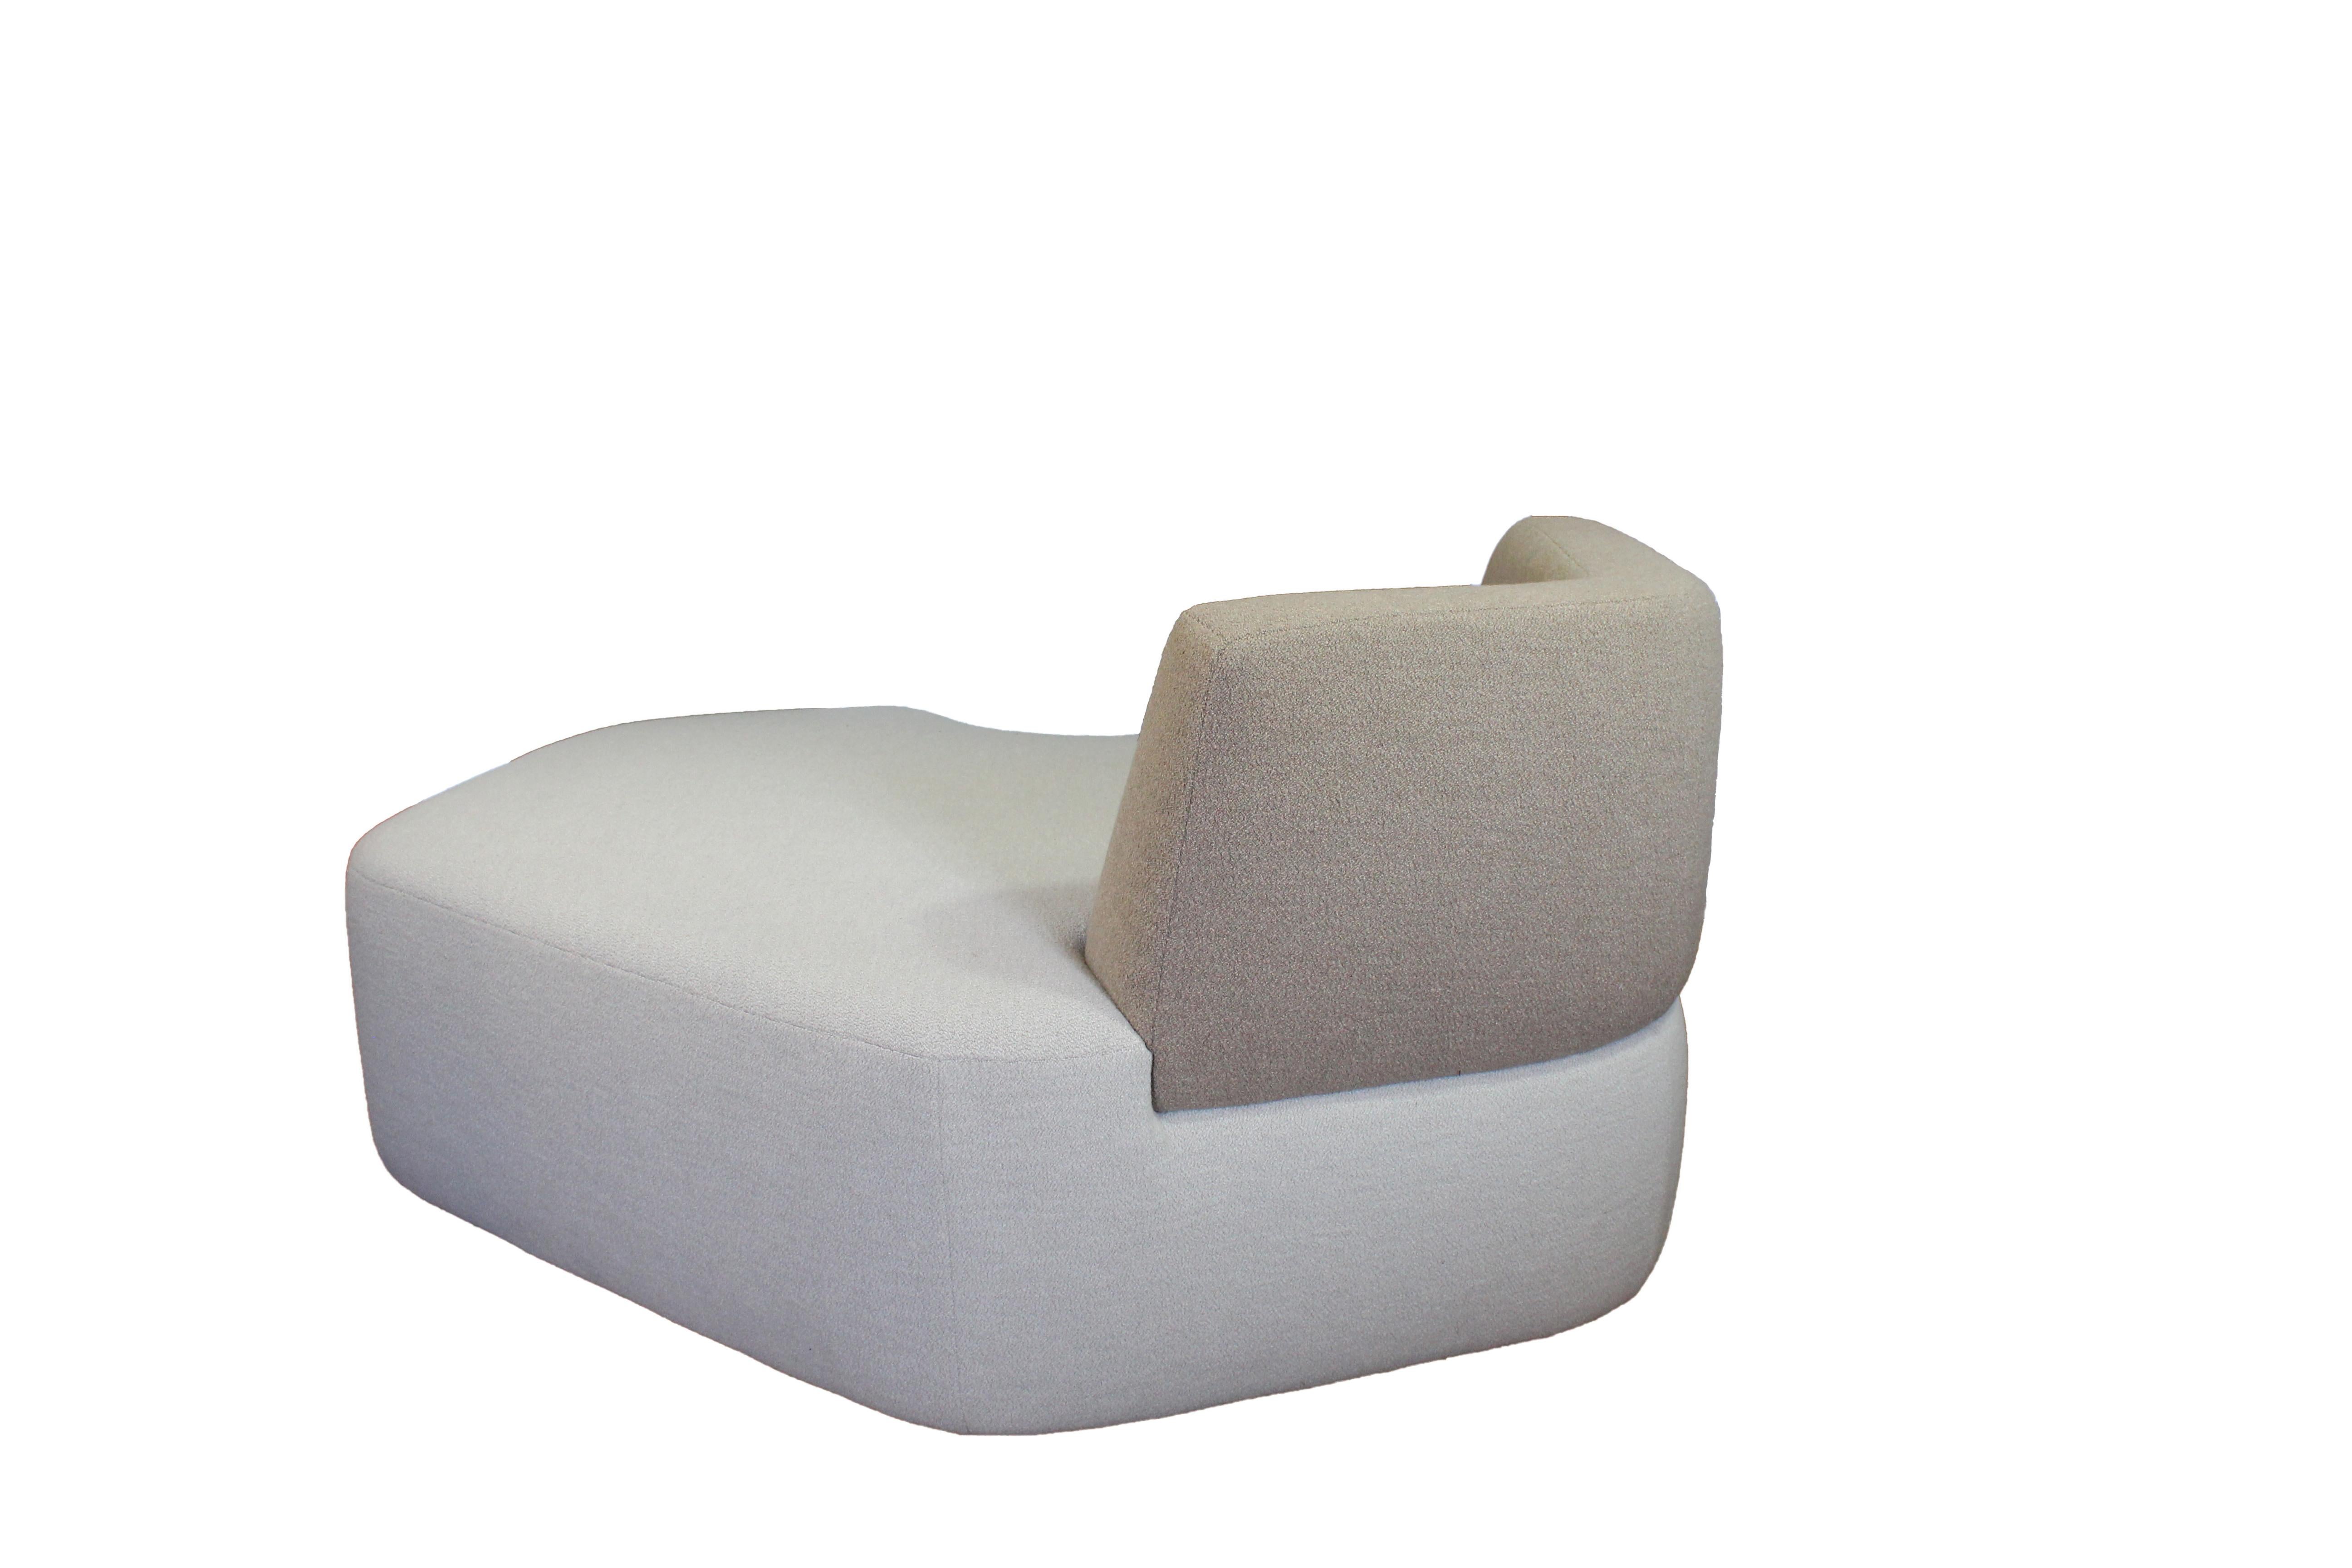 Pierre sofa was inspired by a photographic work Eric Gizard did in the summer of 2019 in Turkey. From white pebbles cleaned and rounded by the sea, he assembled some of them into abstract forms, joining together in organic articulation.
Pierre is a